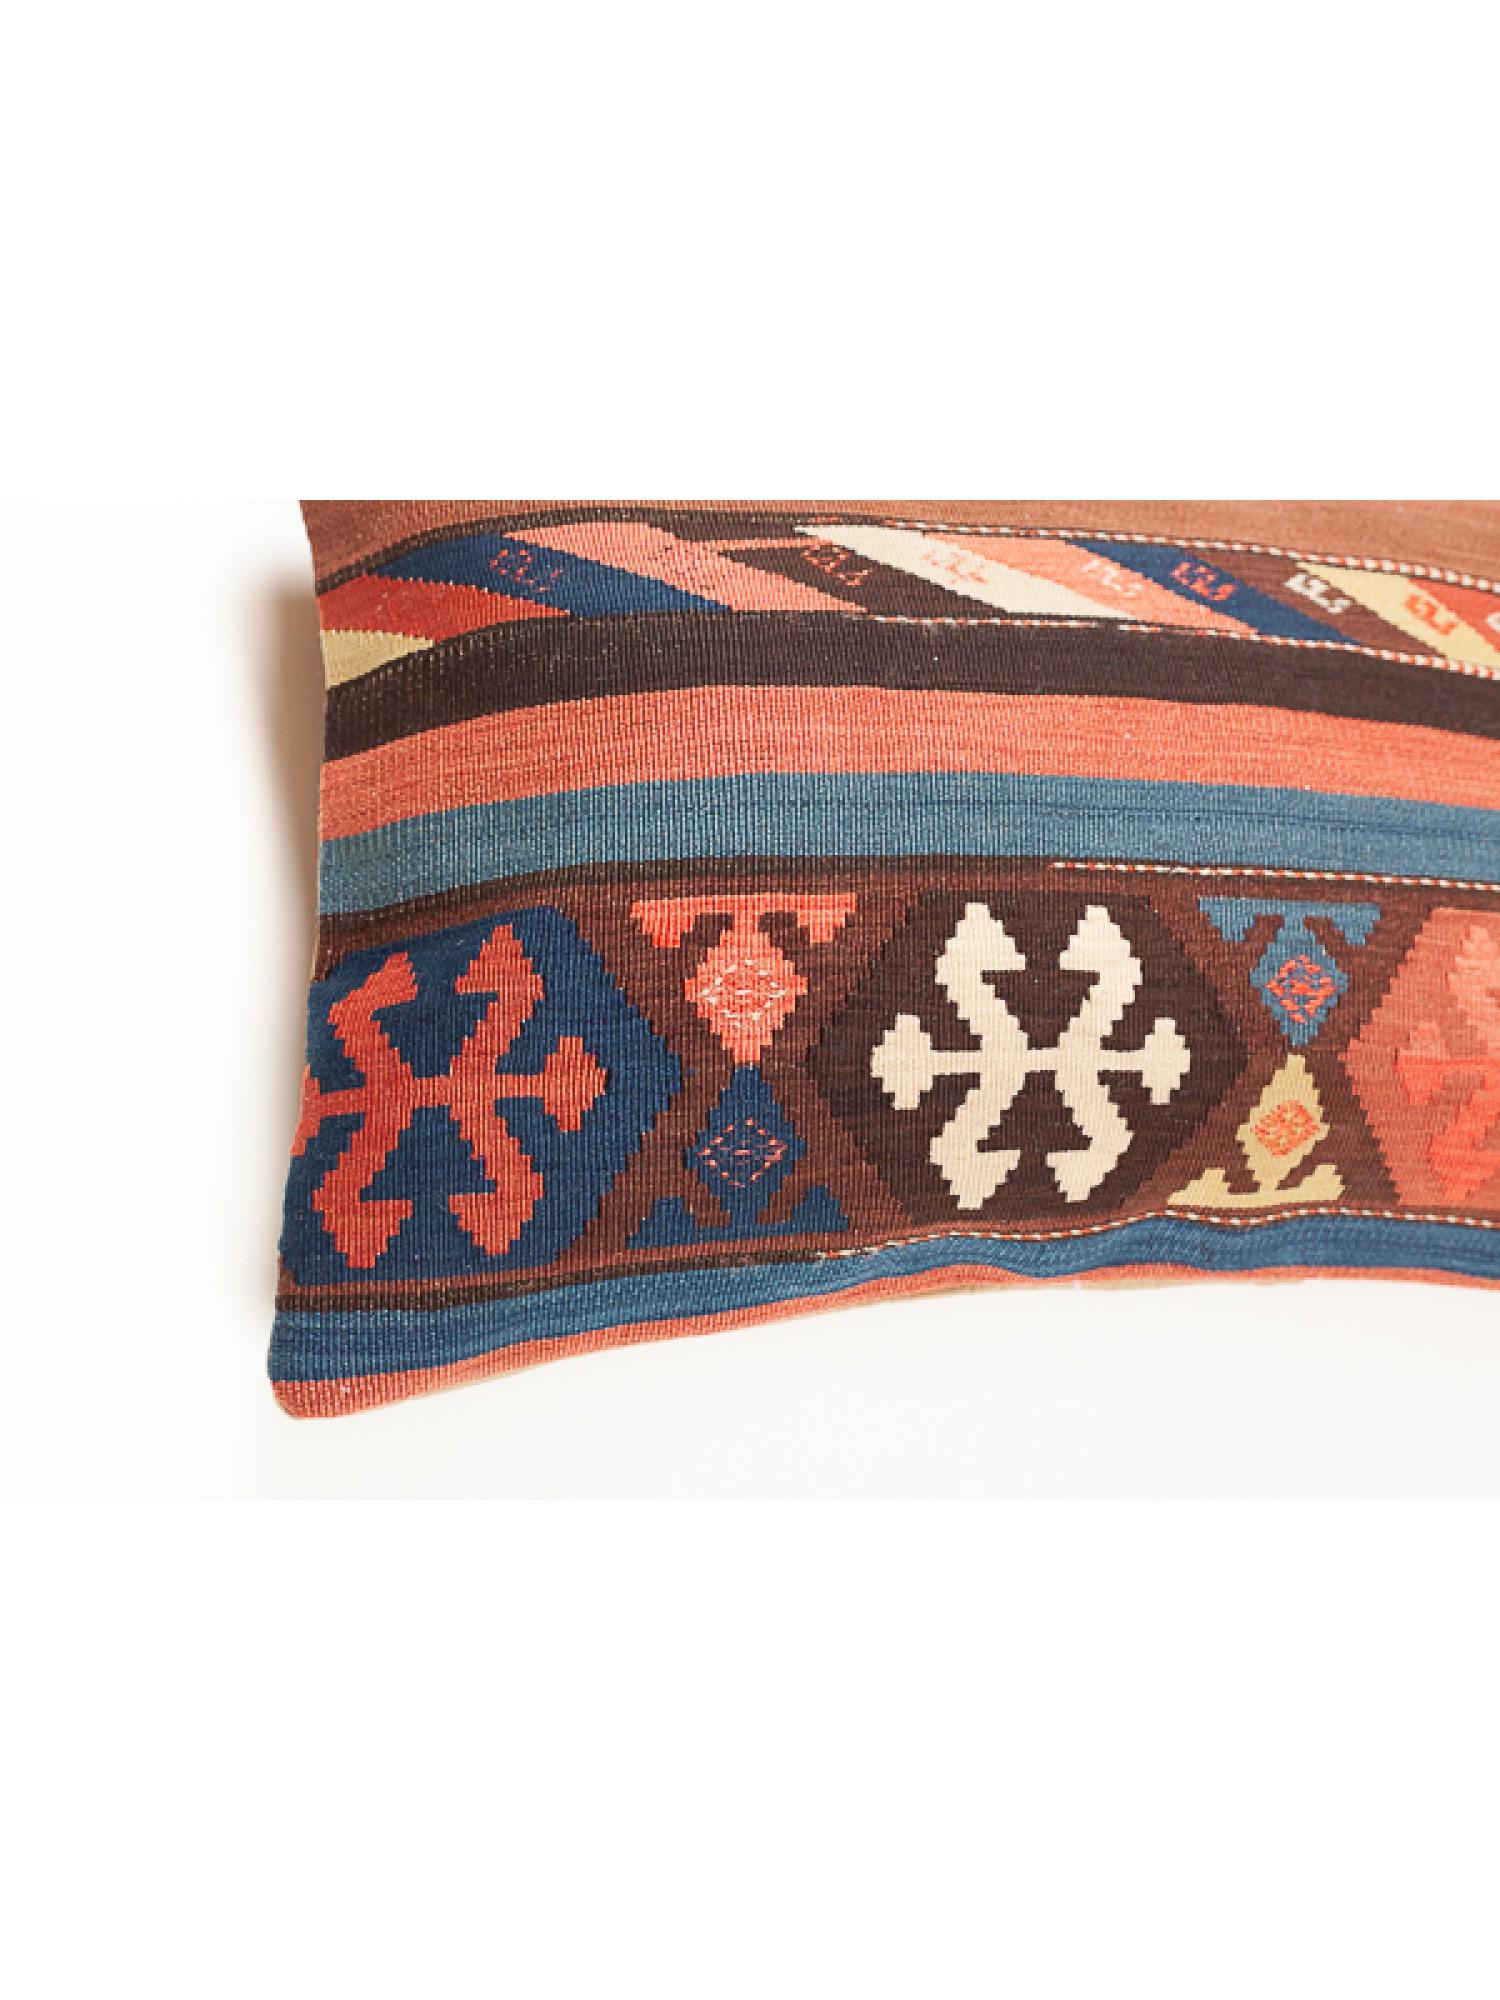 Antique & Old Kilim Cushion Cover, Anatolian Yastik Turkish Modern Pillow KC3542 In Good Condition For Sale In Tokyo, JP